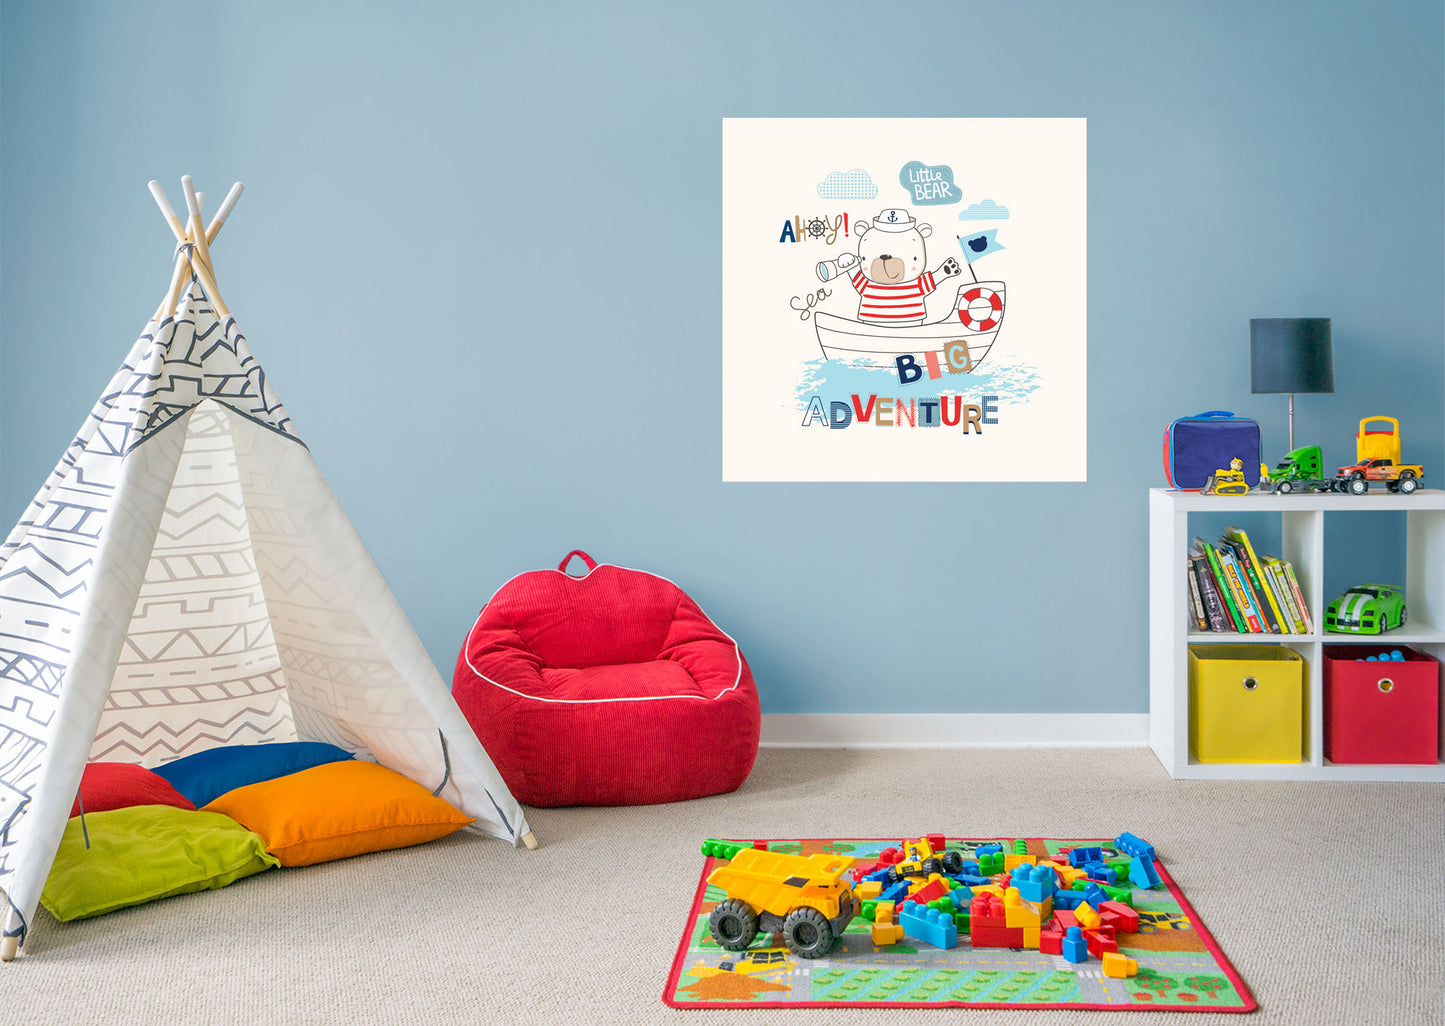 Nursery:  Adventure Mural        -   Removable Wall   Adhesive Decal